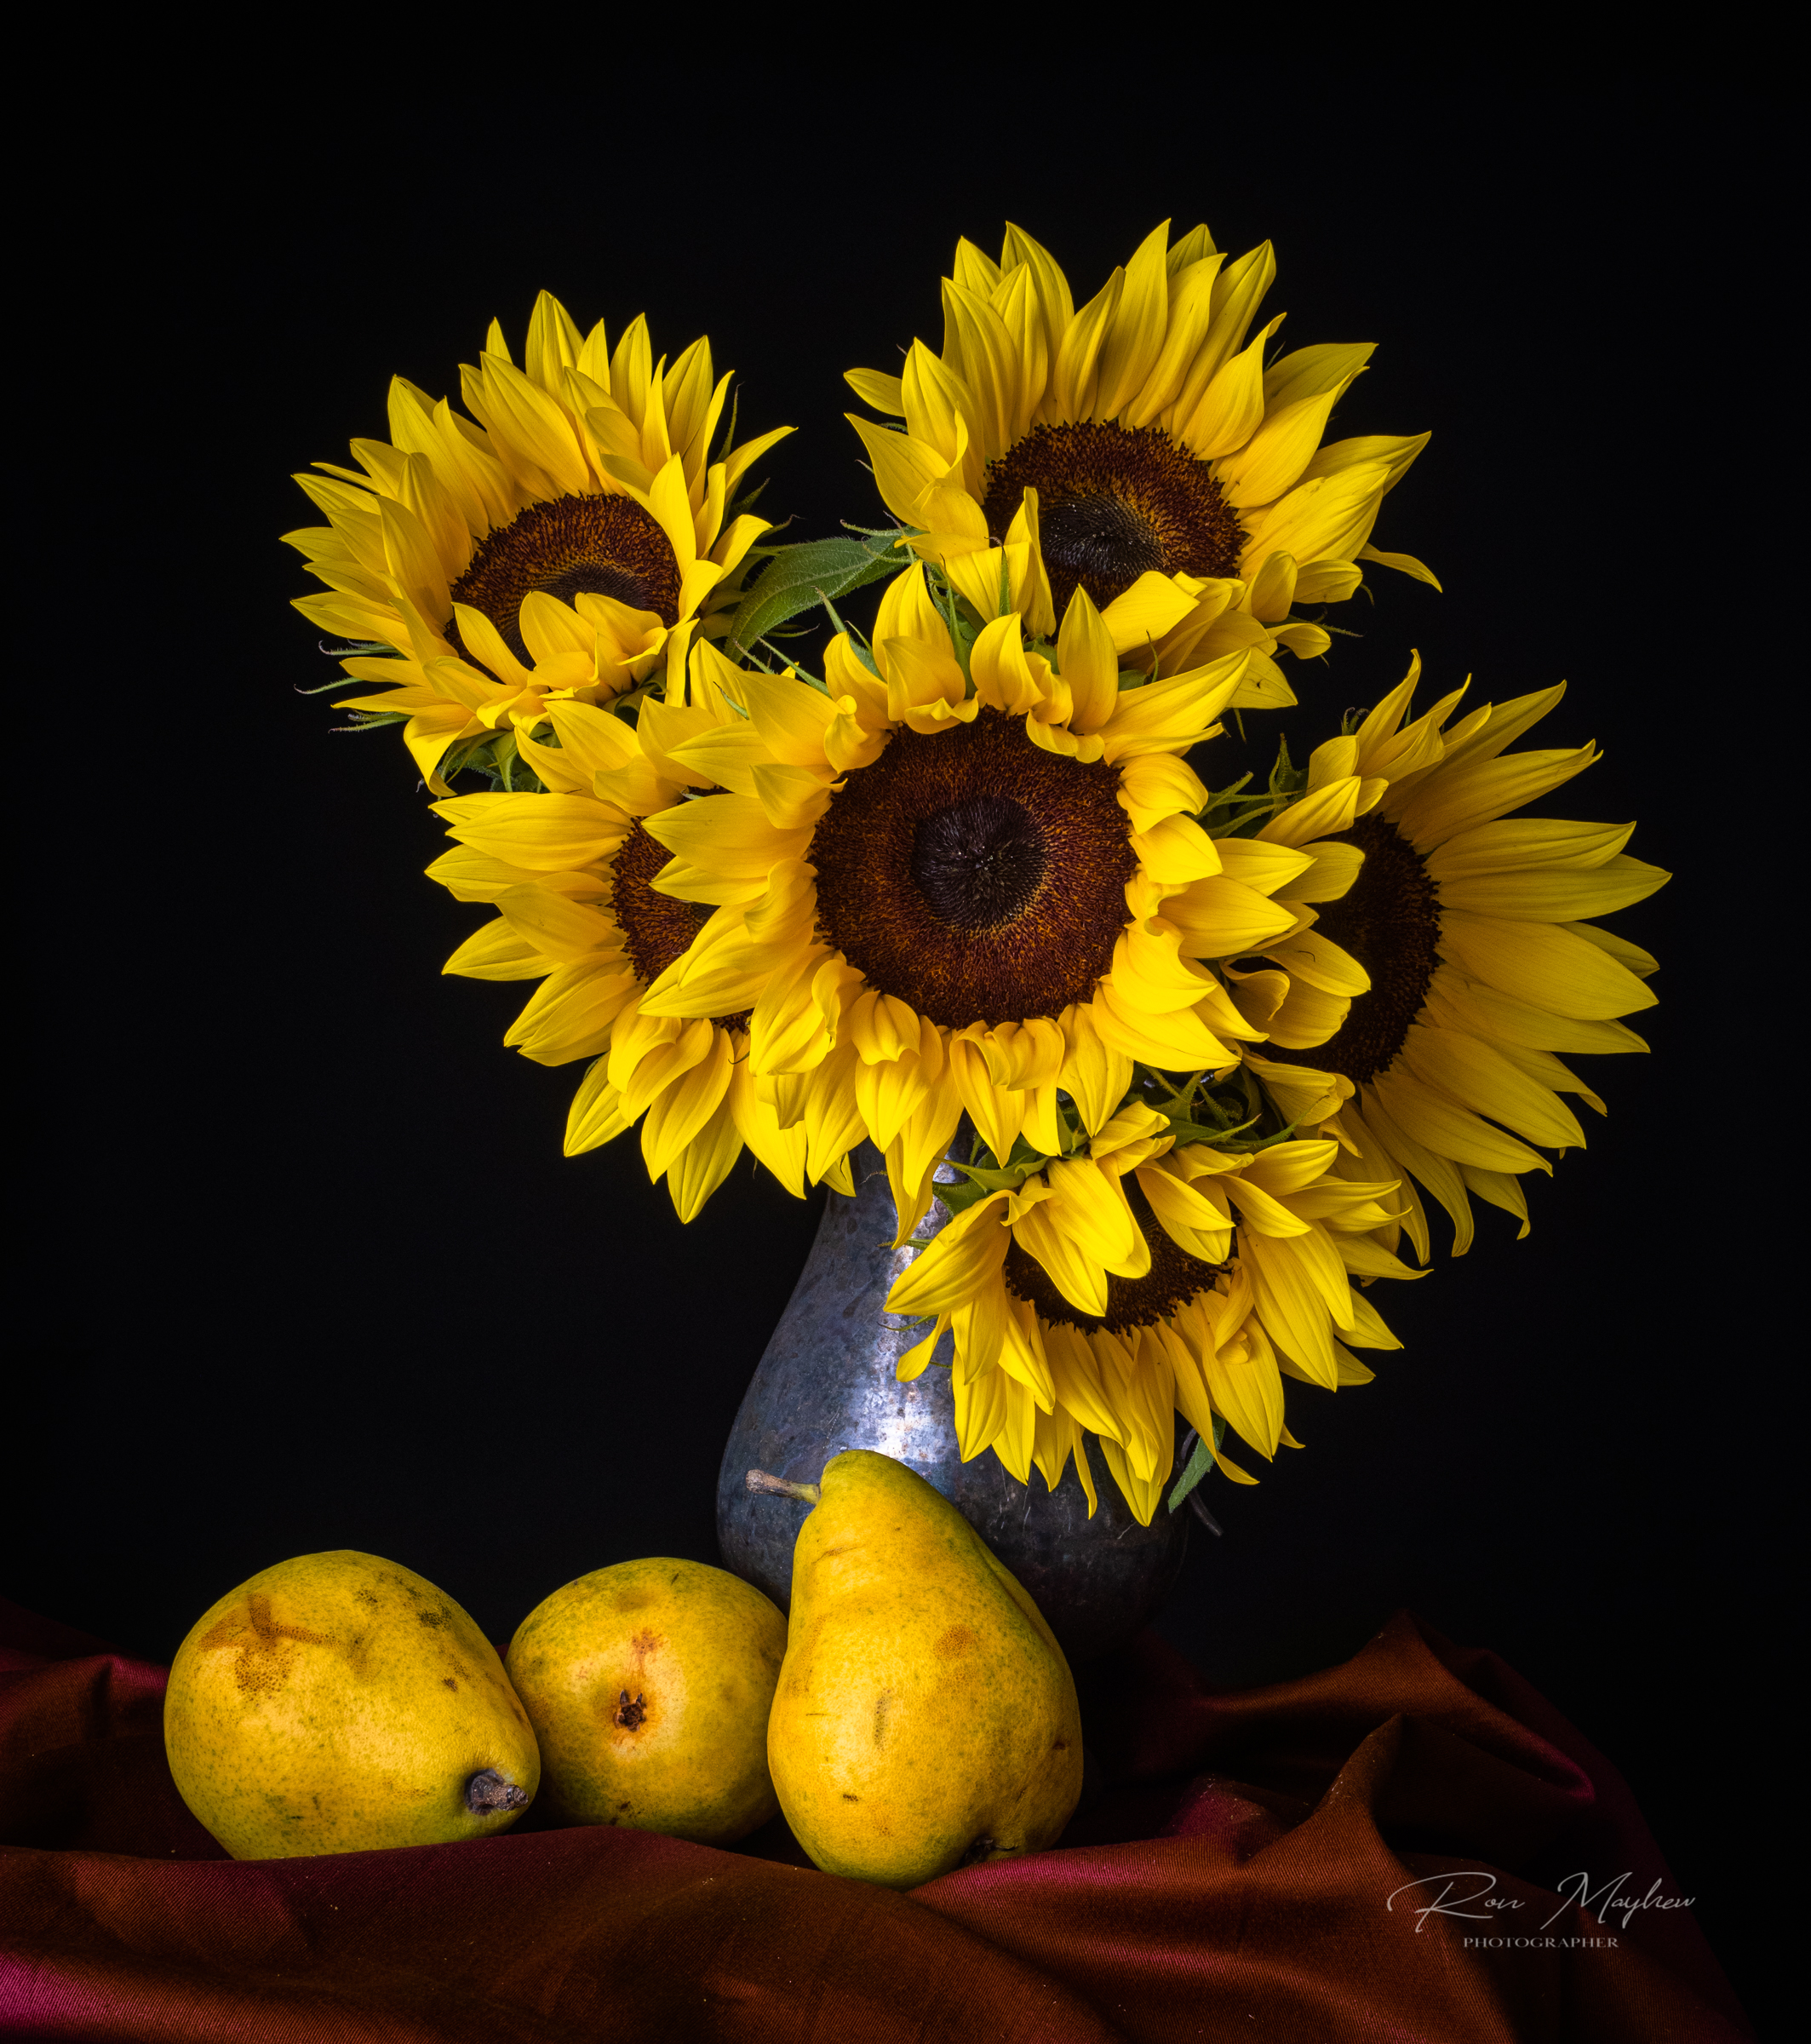 Sunflowers with Pears - a Still Life